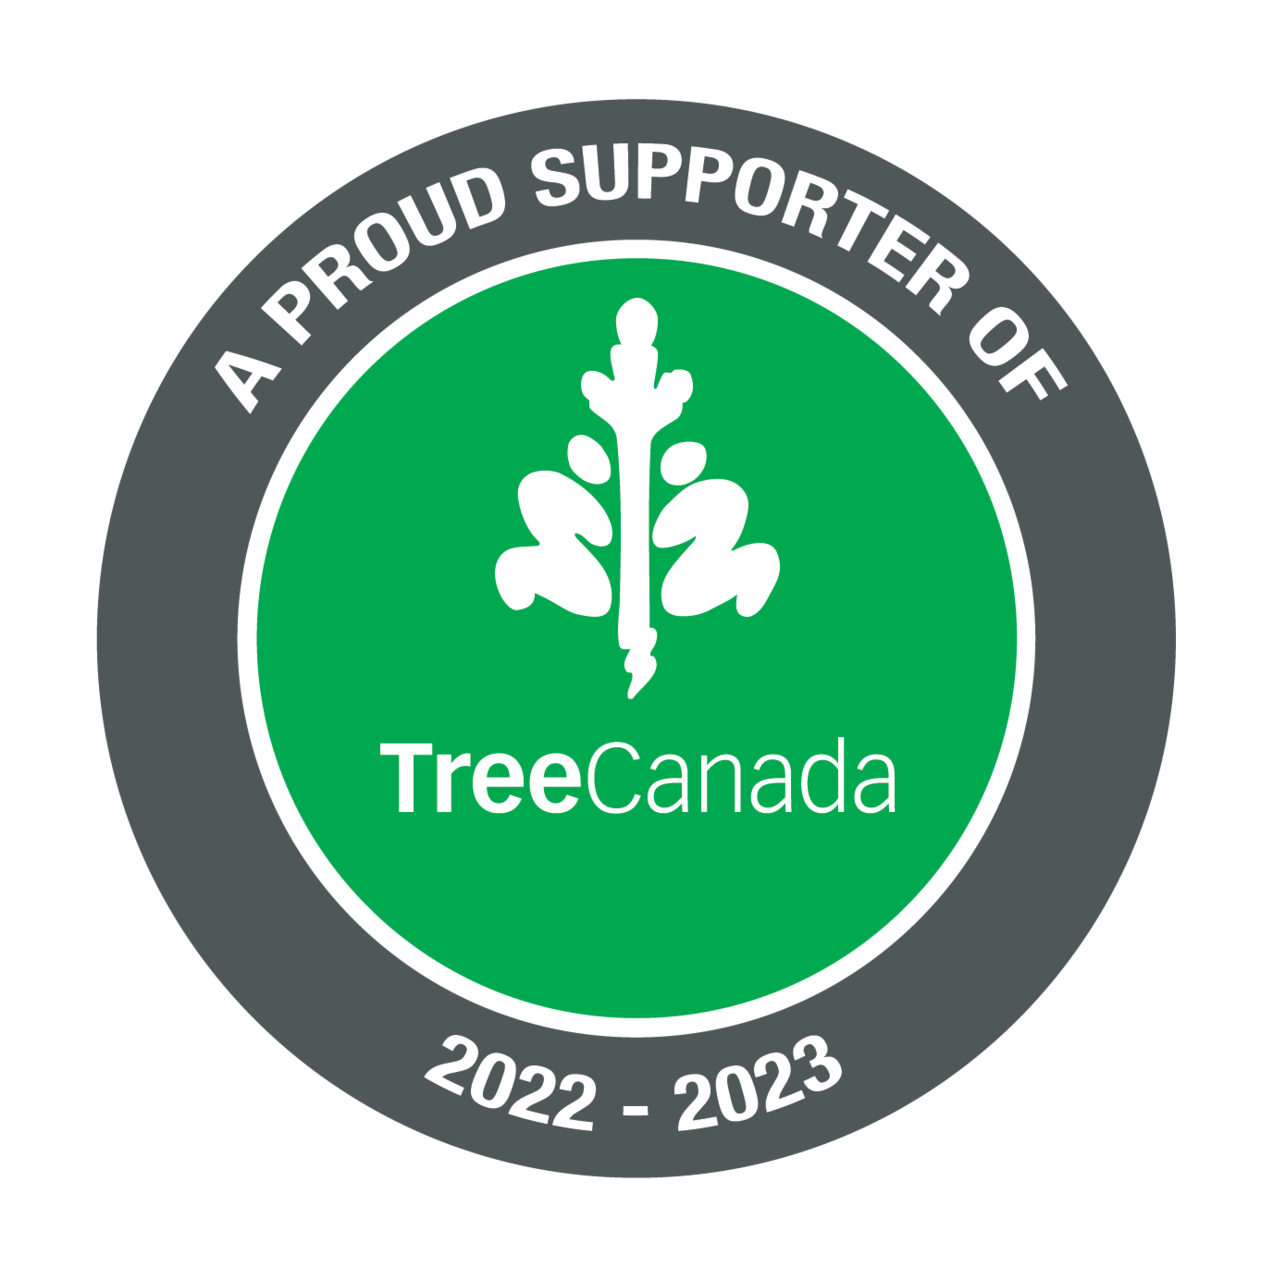 Halmyre is proud to be working towards the Natural Resource Canada's 2 Billion Trees Initiative.